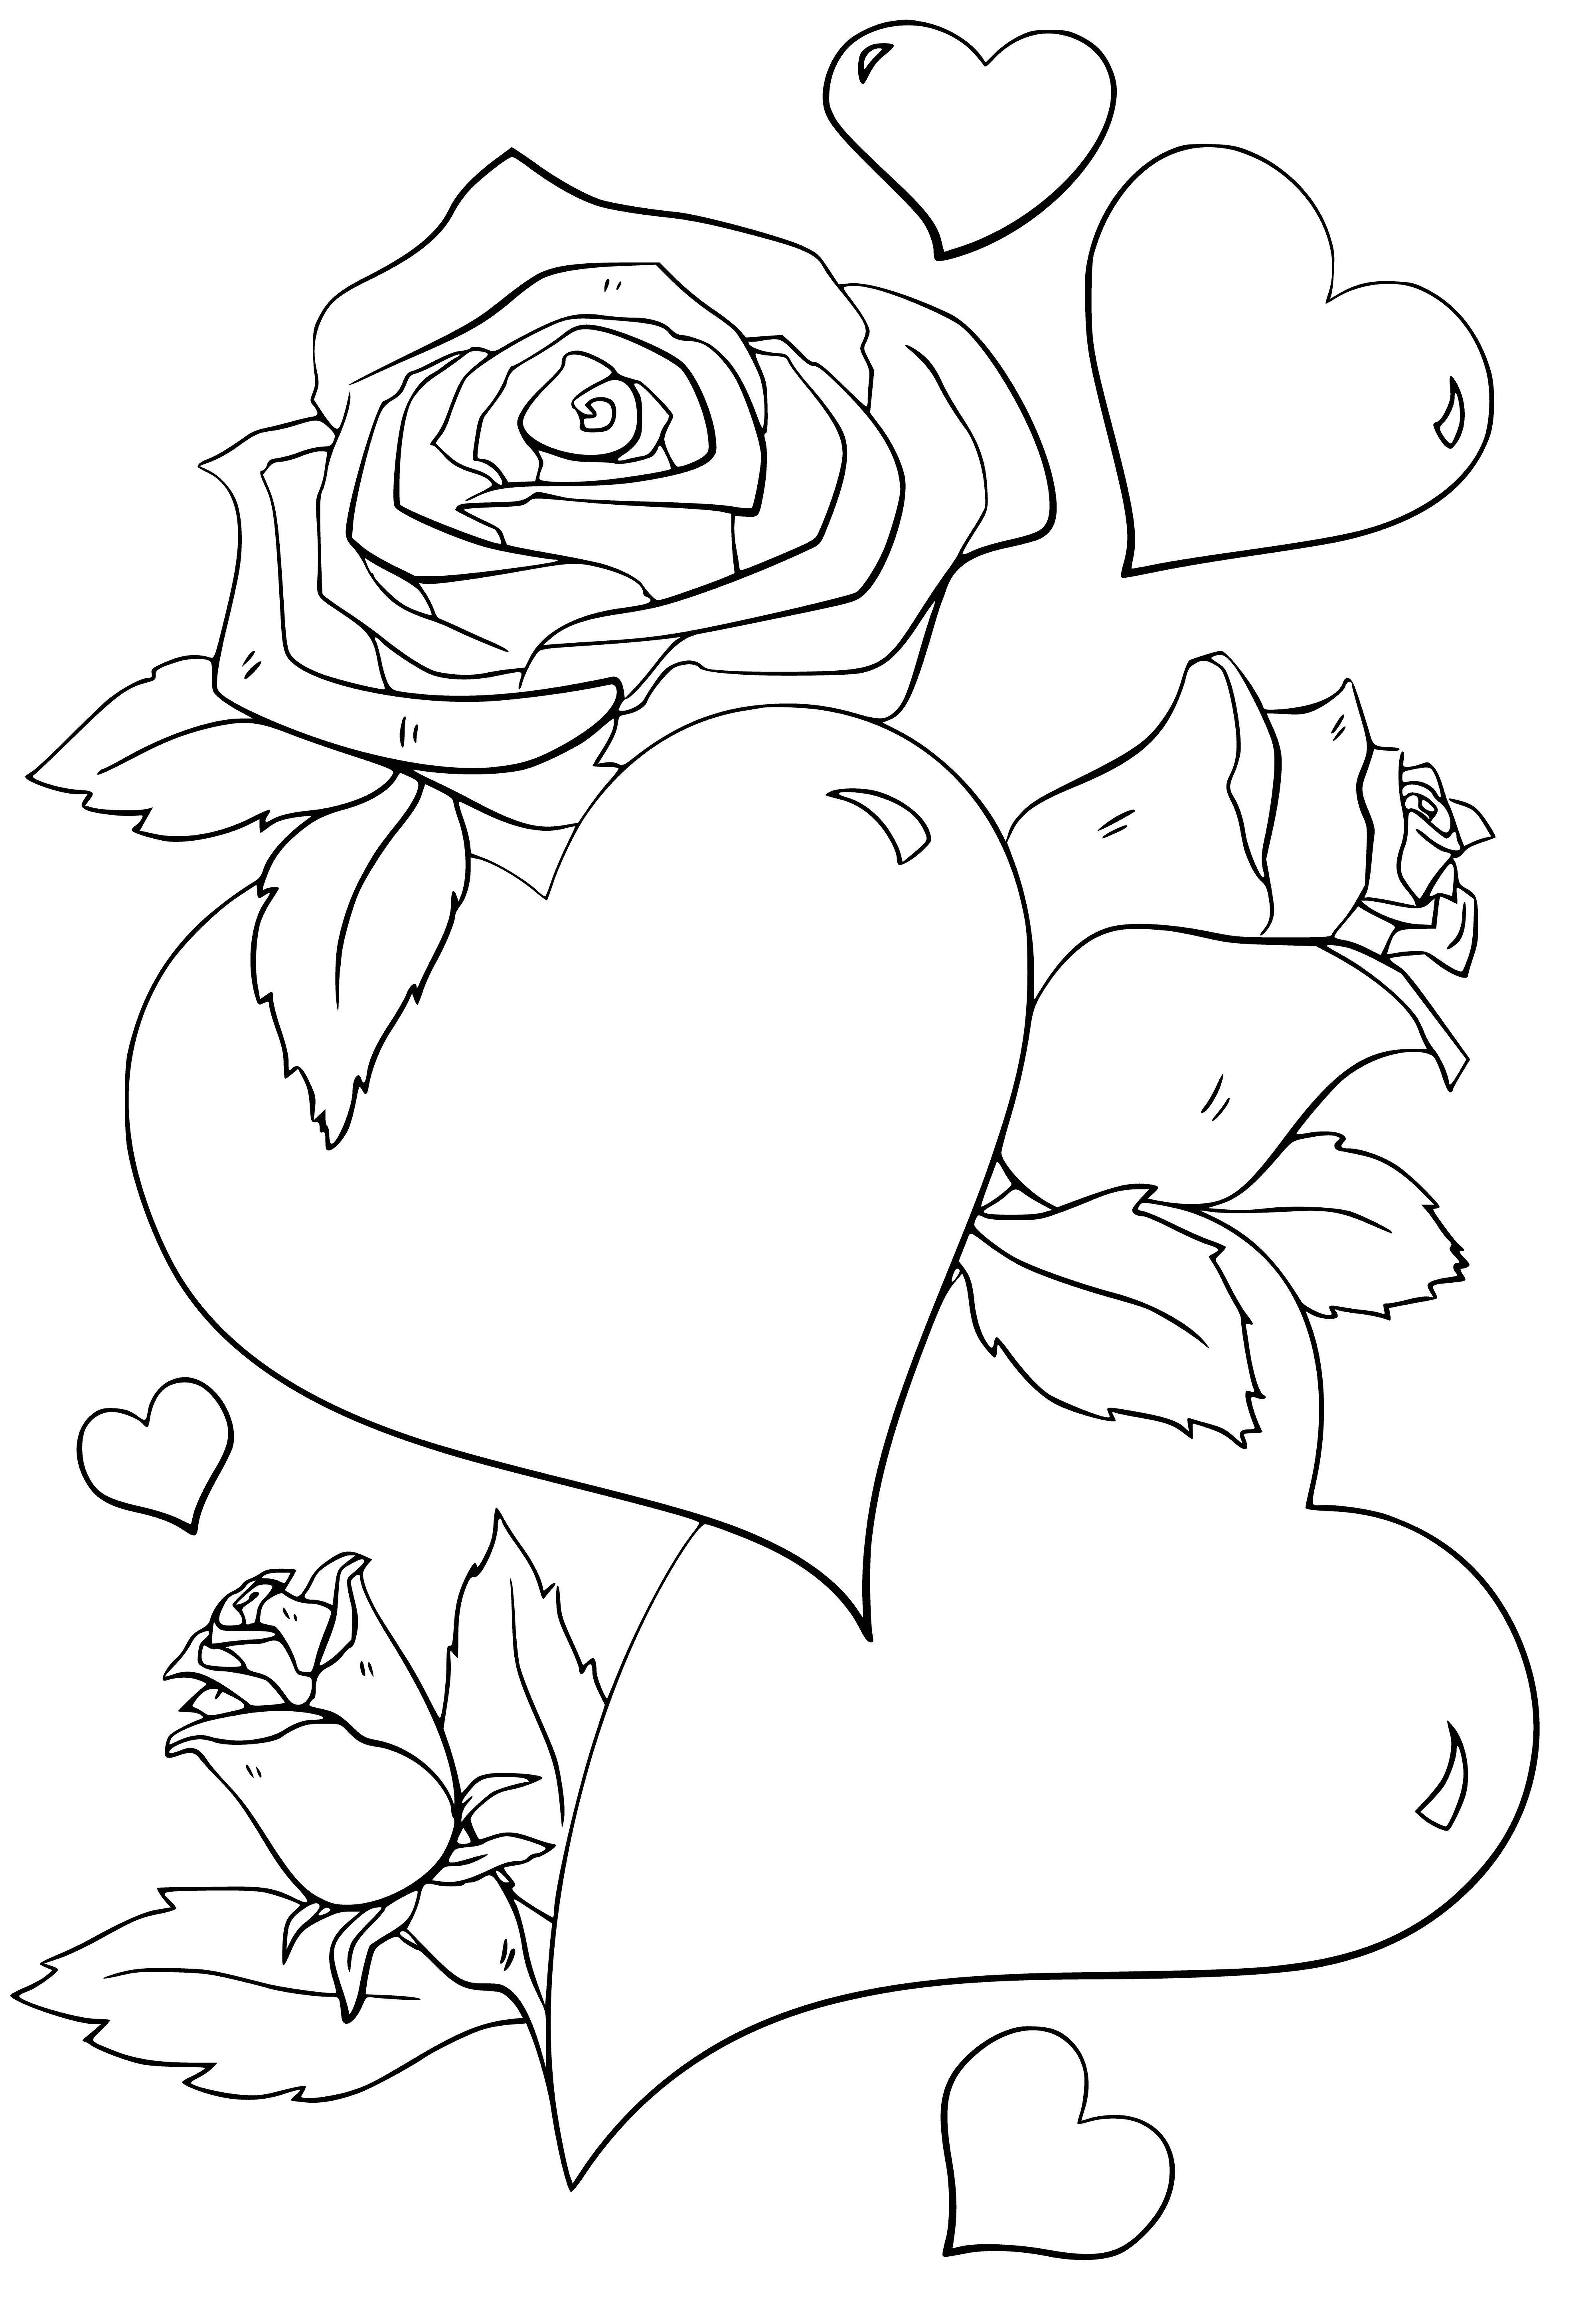 Roses and hearts coloring page